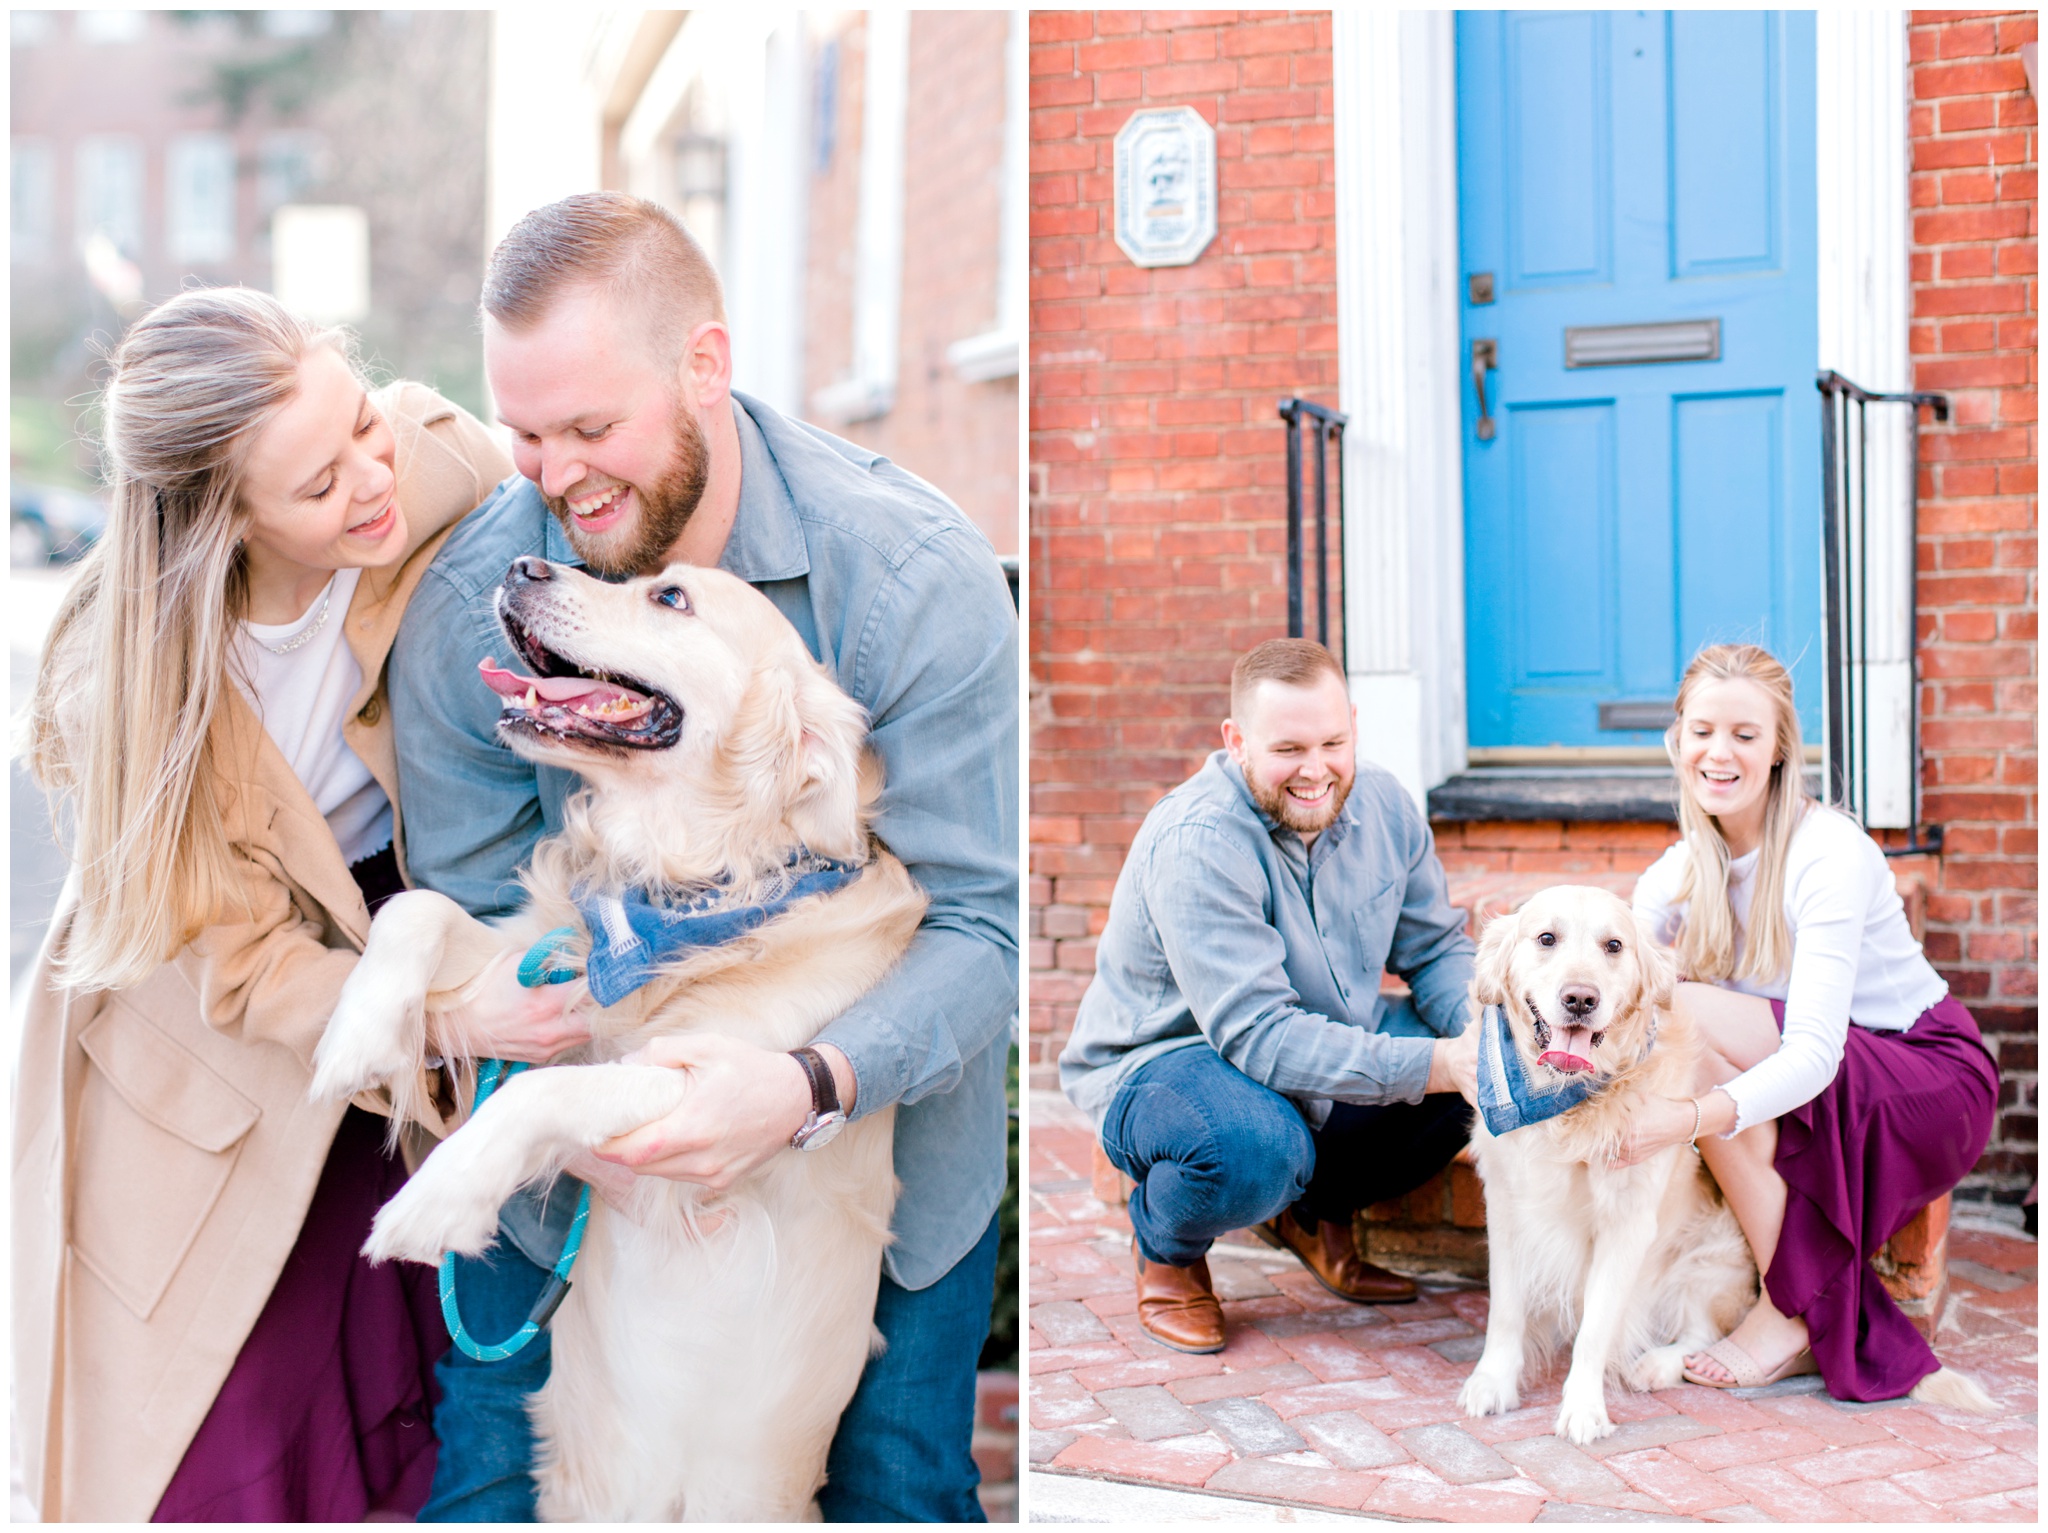 Downtown Annapolis Engagement Session - Check out this cute Annapolis Engagement Session. We took images on the docks, down the alleyways, near the statehouse, and more! 